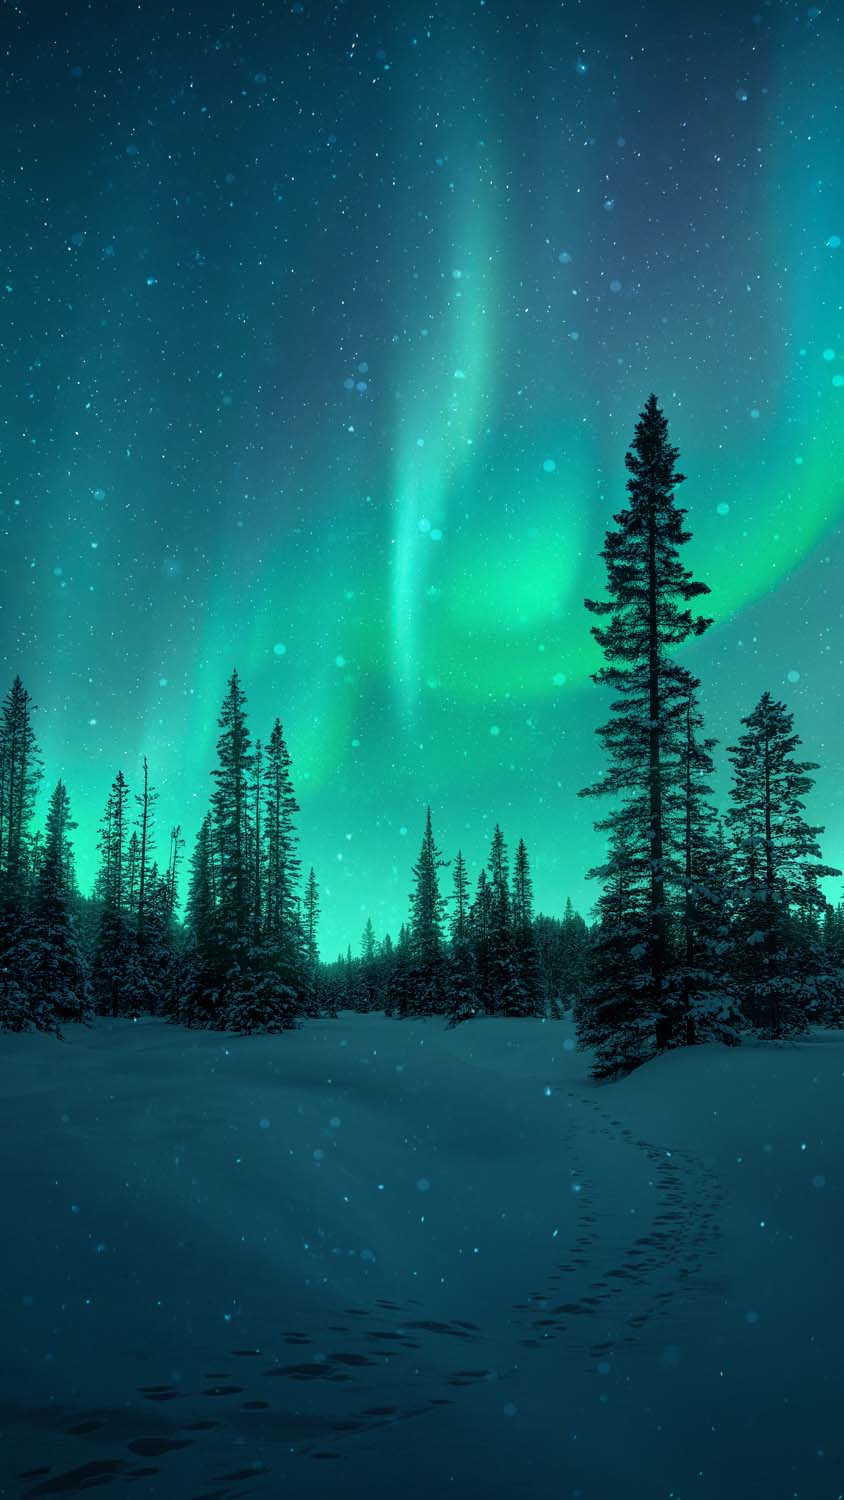 Snow Fall Northern Lights IPhone Wallpaper HD  IPhone Wallpapers